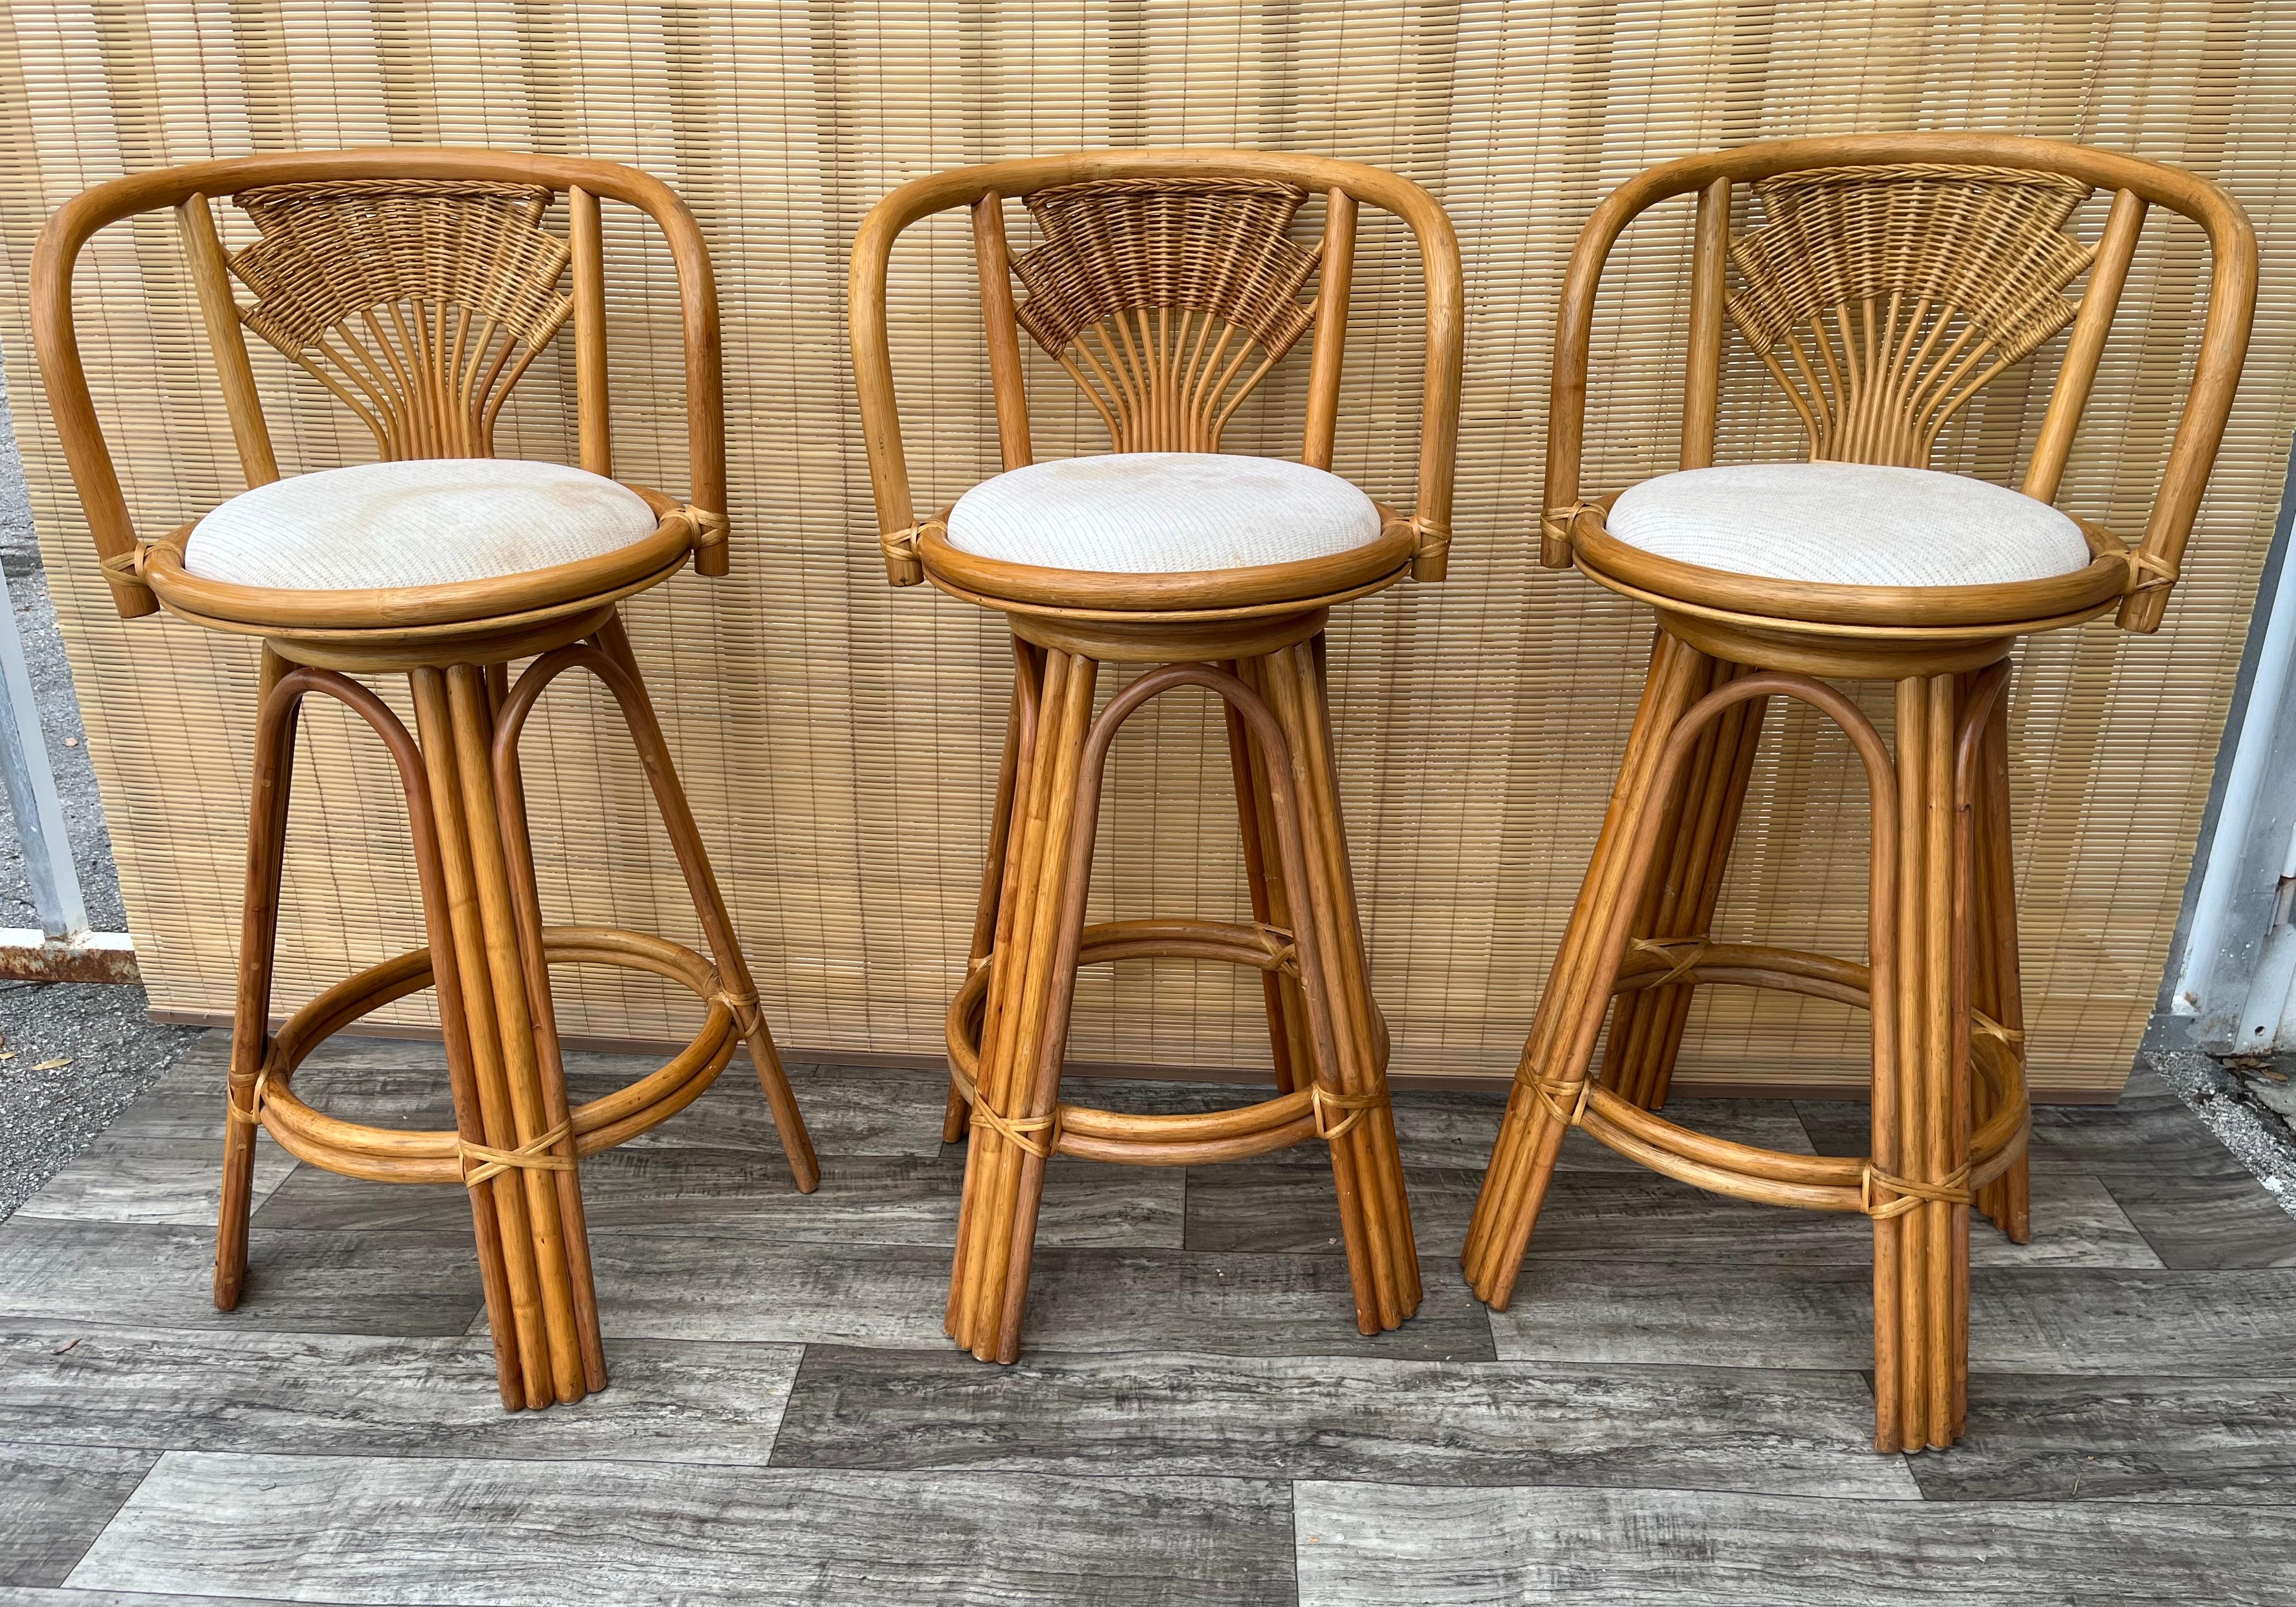 A set of Three Vintage Coastal Style Wicker Rattan Swivel Bar Stools. circa 1980s
Feature a Rattan frame, cane detailing on backrests, and round seats with a the original oatmeal colored fabric seats. 
In good original condition with signs of wear